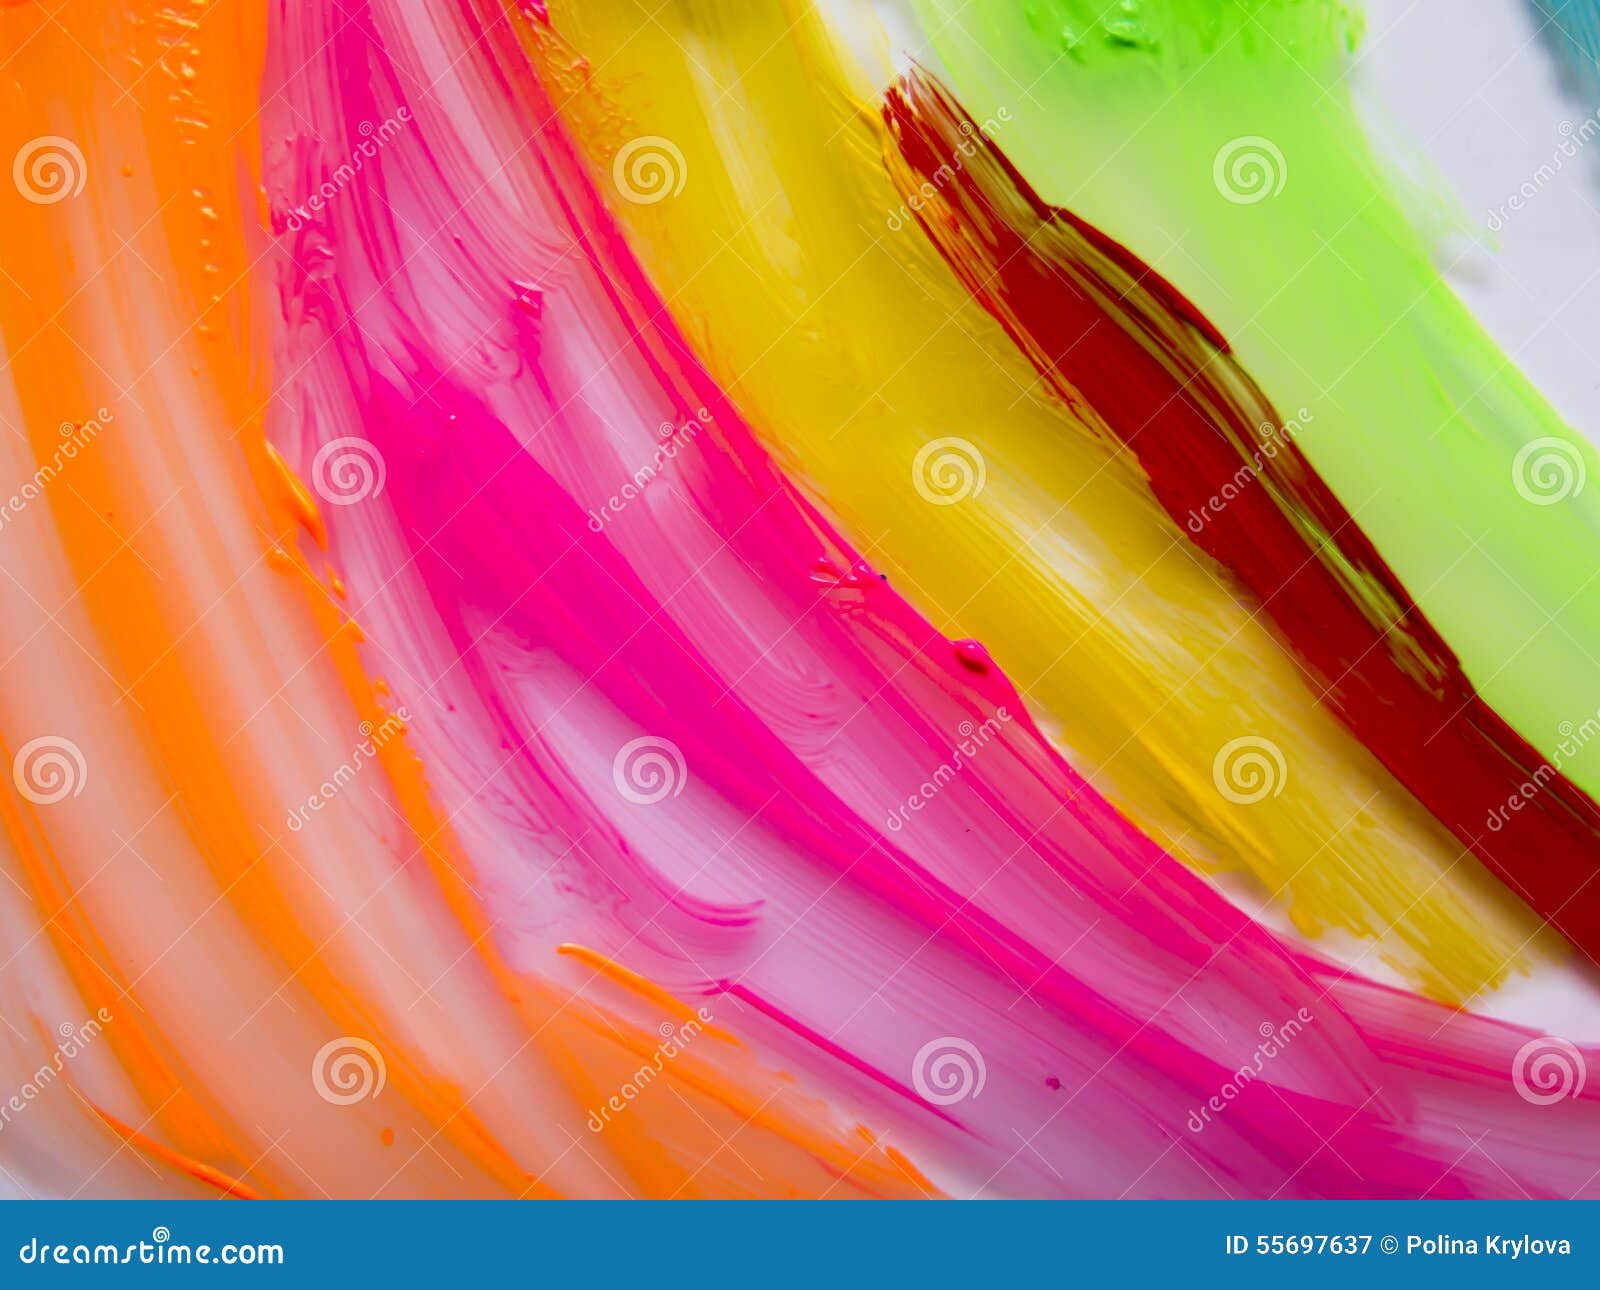 Paint Strokes on the Glossy Surface on the Lumen Stock Image - Image of ...